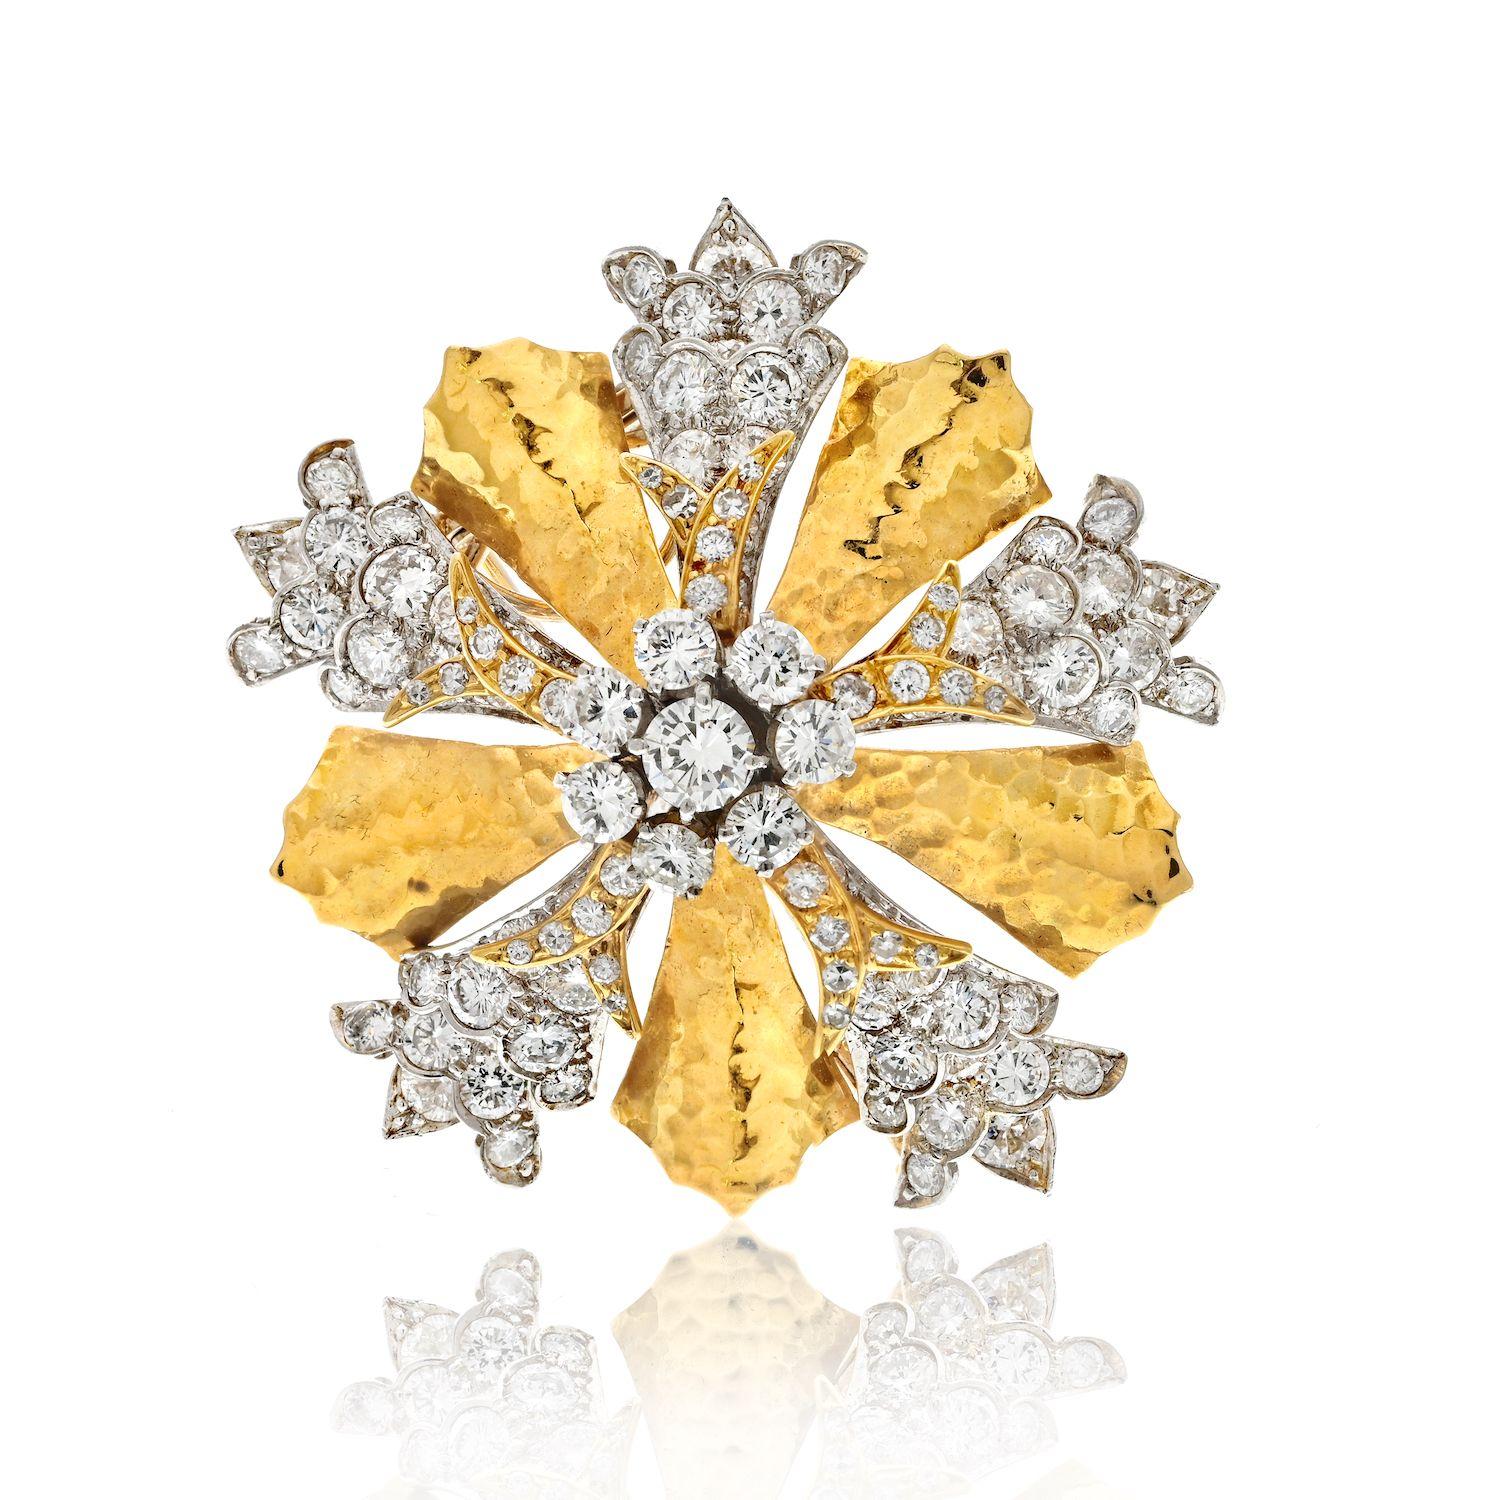 The David Webb Hammered Gold, Platinum, and Diamond Clip-Brooch is a magnificent piece of jewelry, showcasing the exceptional craftsmanship and design for which David Webb is known. Crafted in 18kt gold, this brooch features a stunning floret